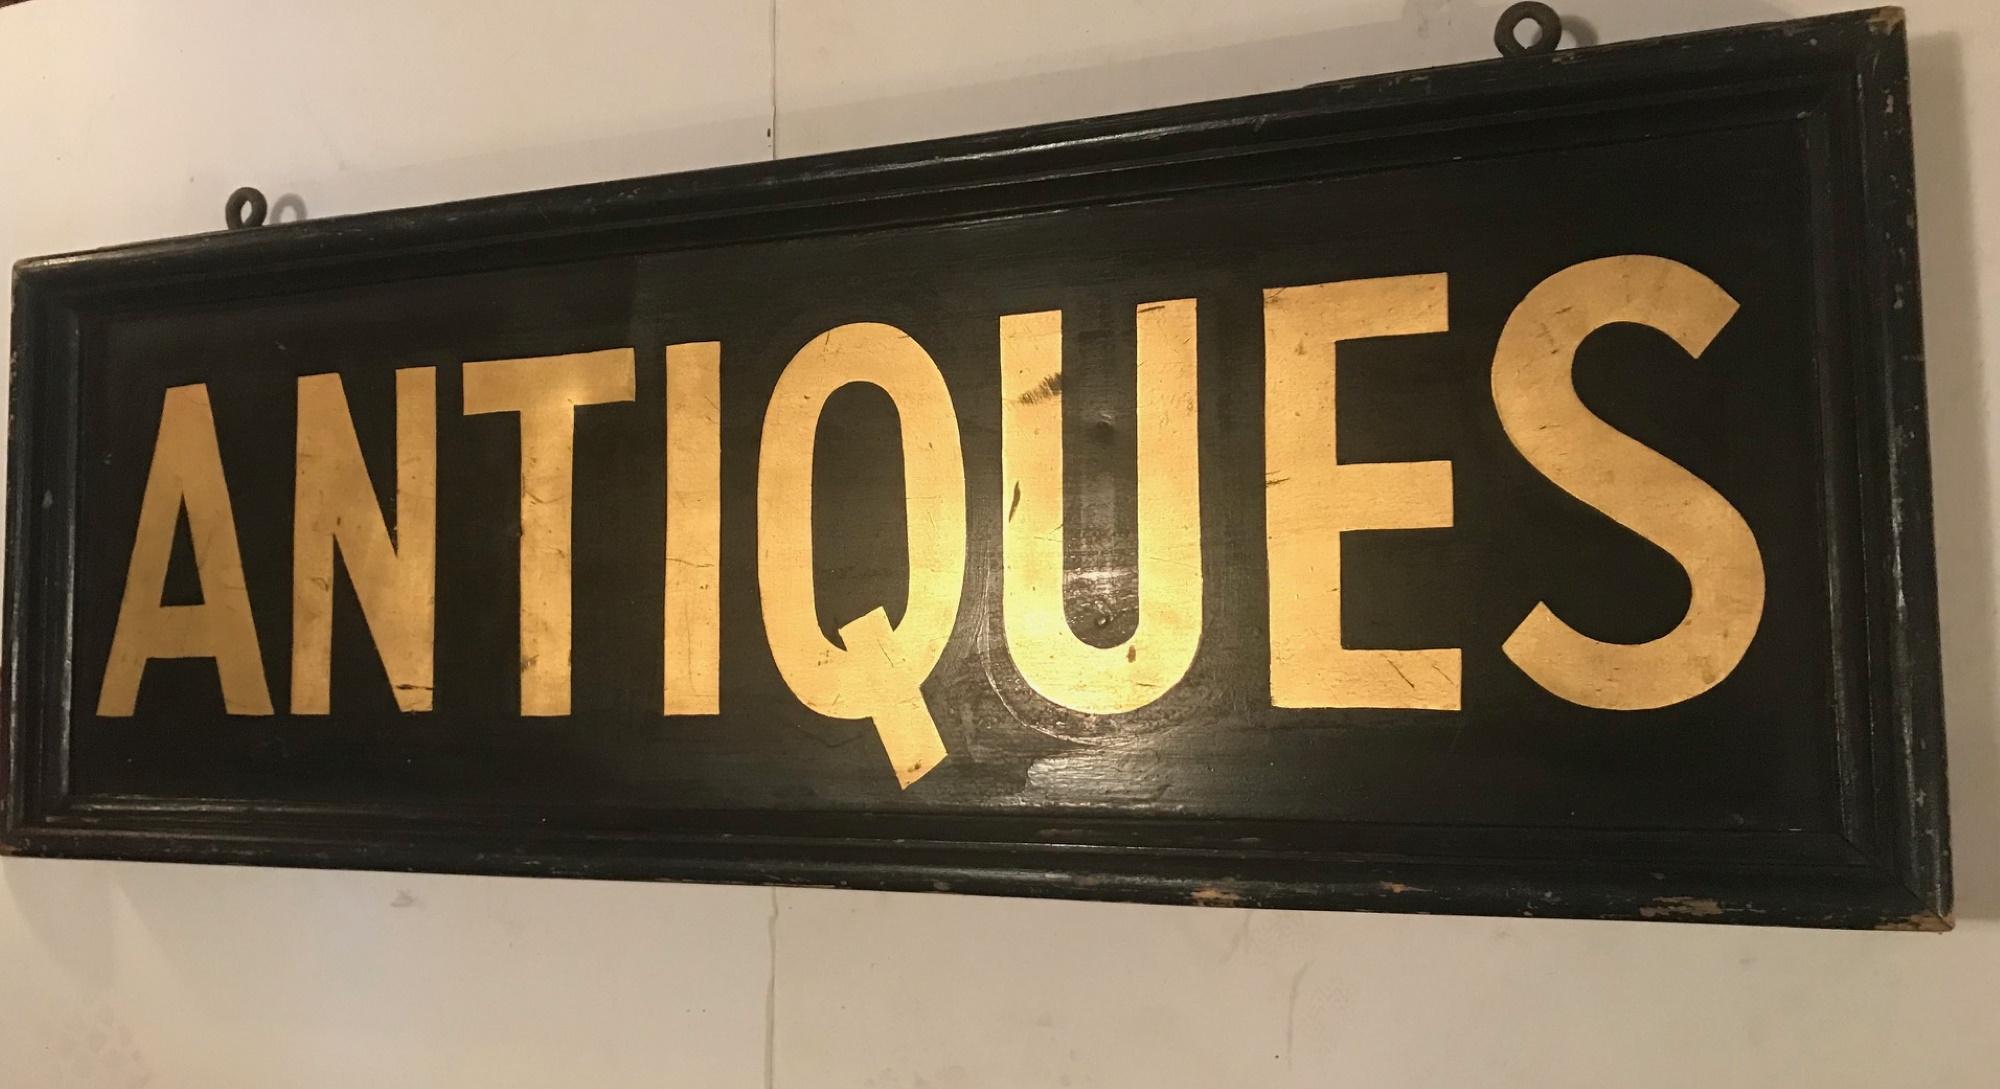 This very rare and vintage sign for the antique trade is from the early 20th century. It is hand painted on metal and the letters are gold leafed on both sides. A solid wood frame and fantastic hardware make an impressive statement.

This sign is